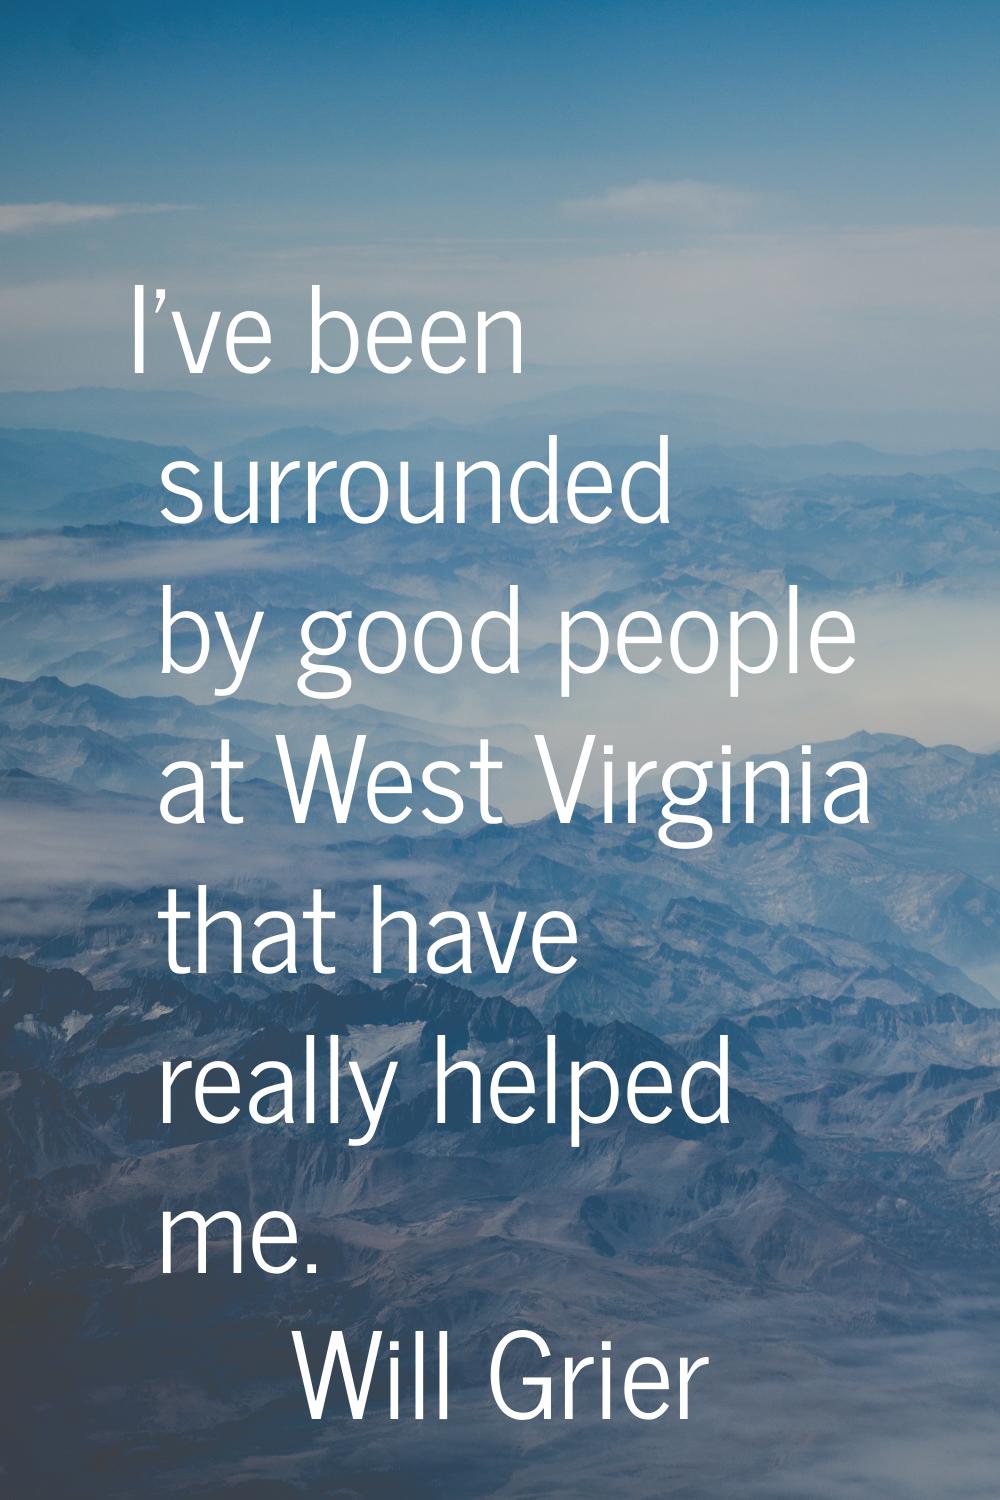 I've been surrounded by good people at West Virginia that have really helped me.